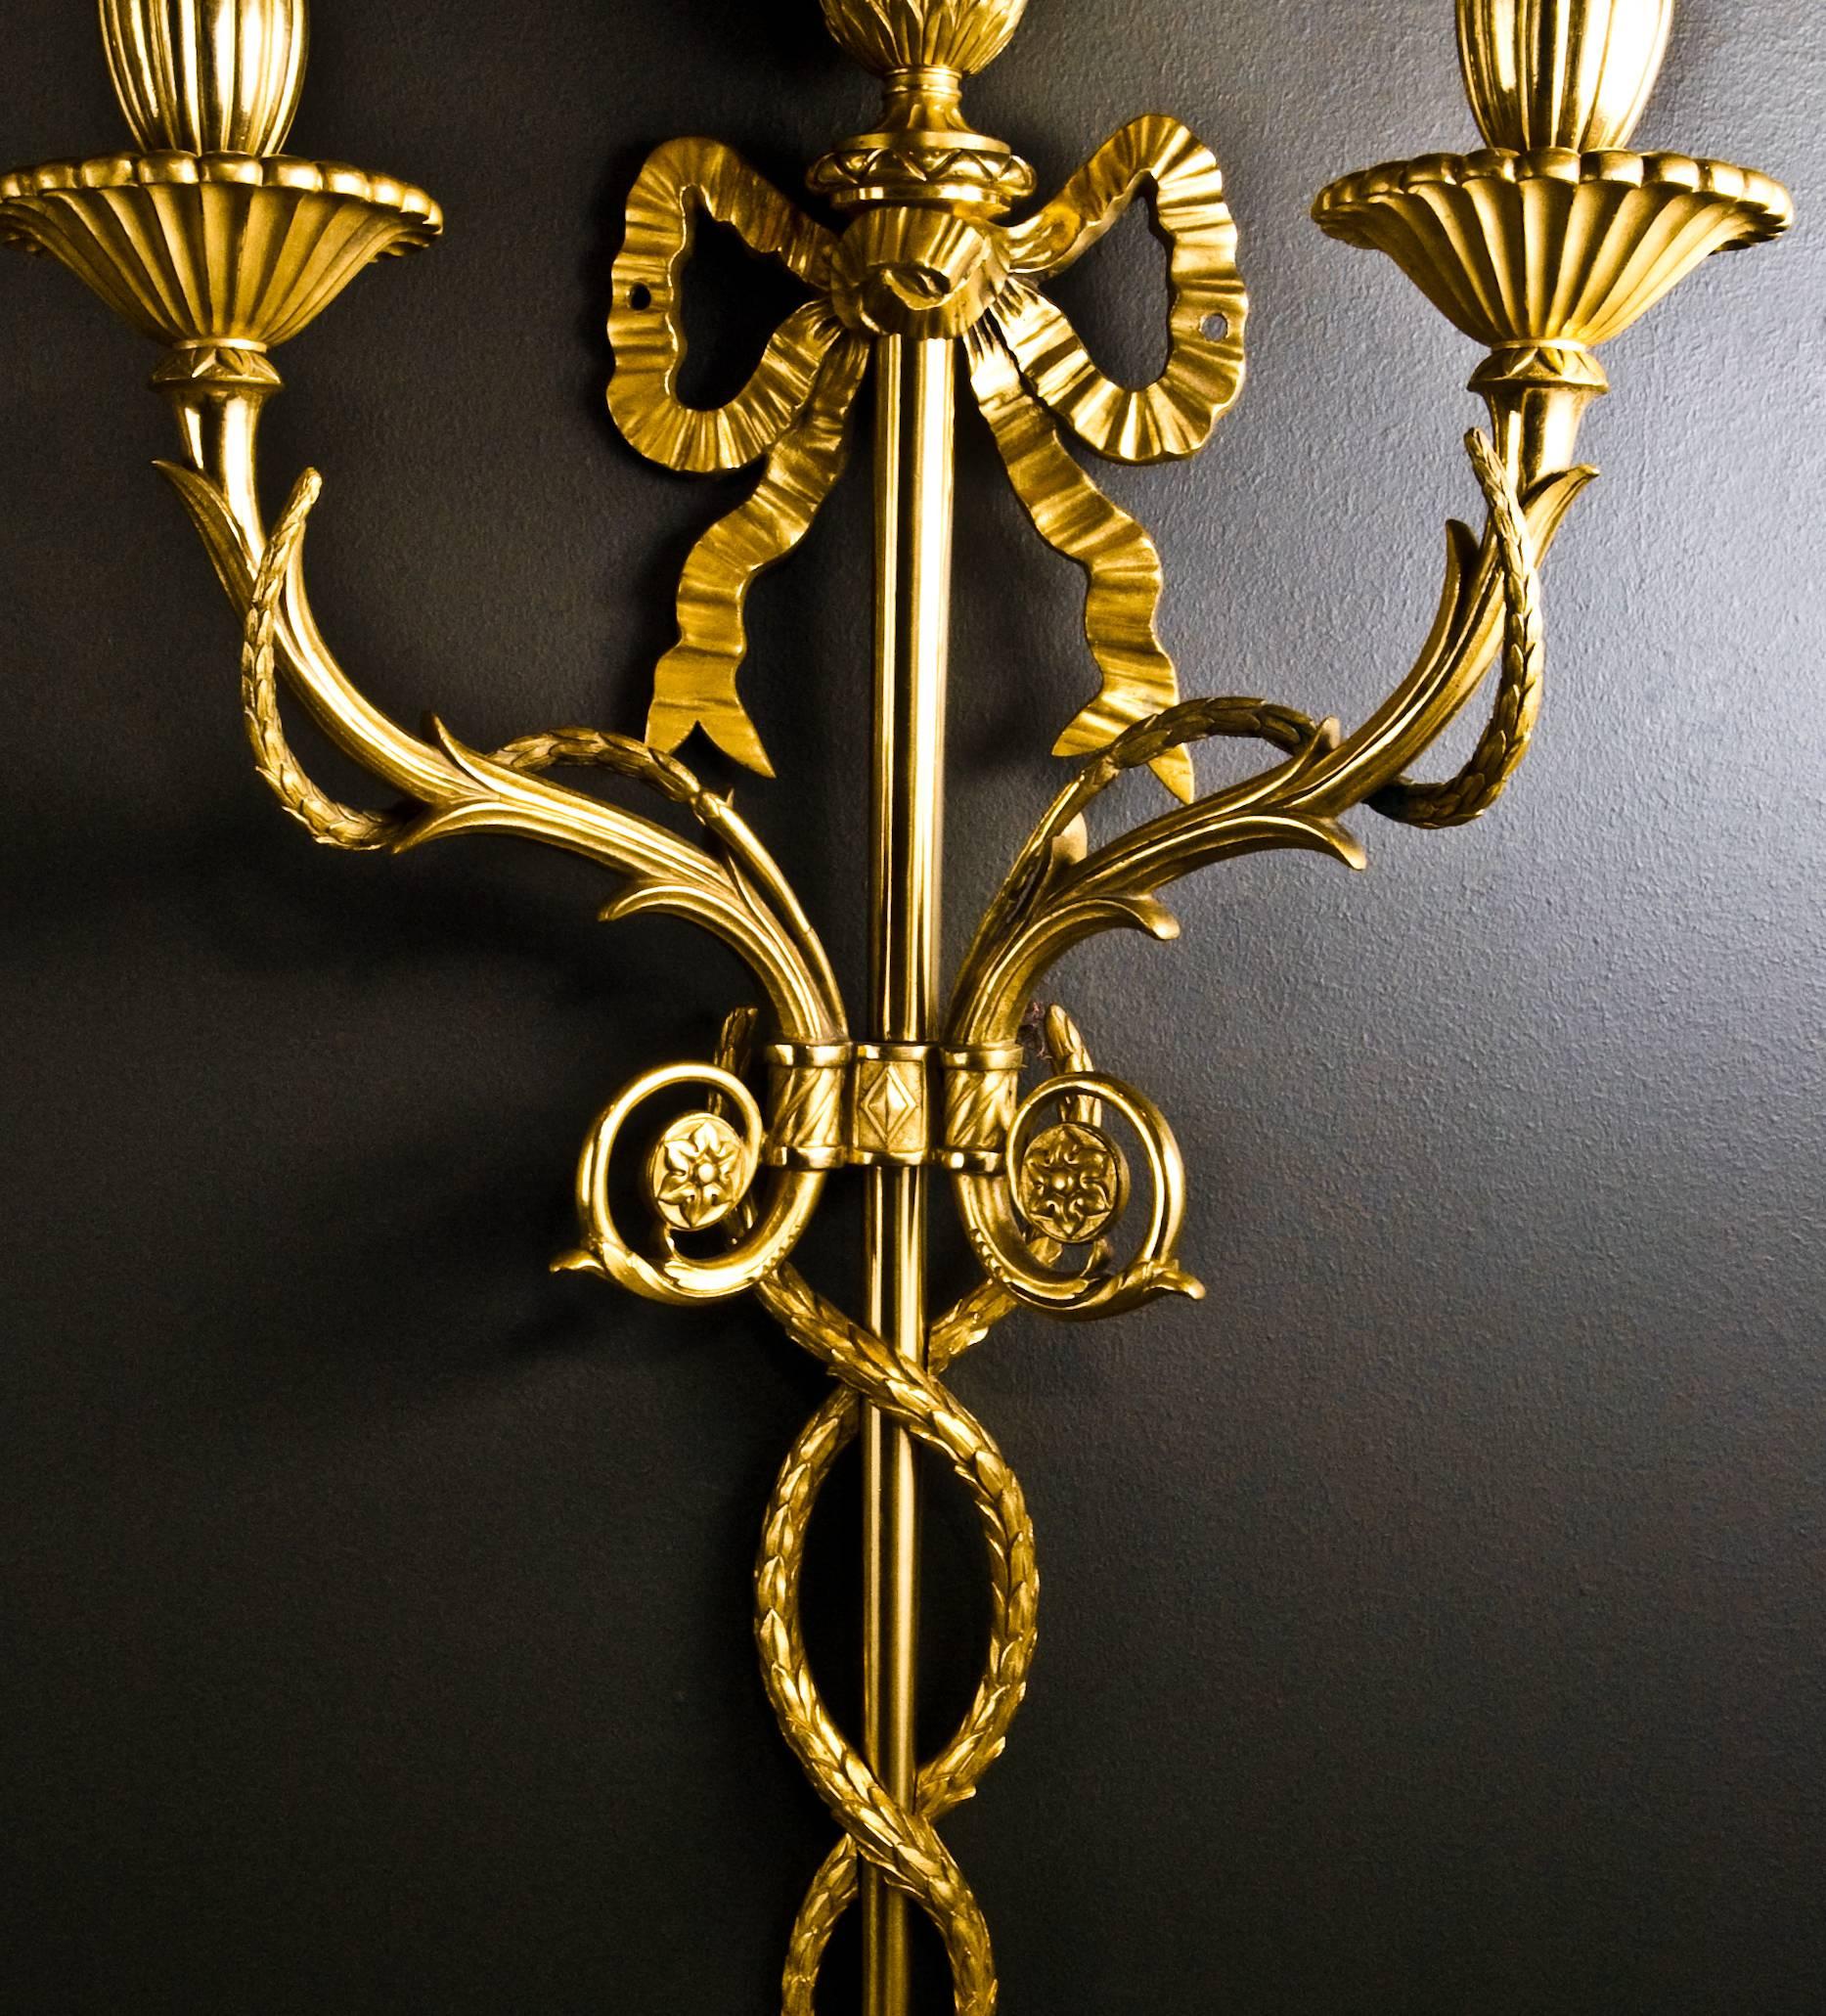 Pair of Superb Antique French Louis XVI Style Gilt Bronze Two-Light Wall Sconces (Französisch)